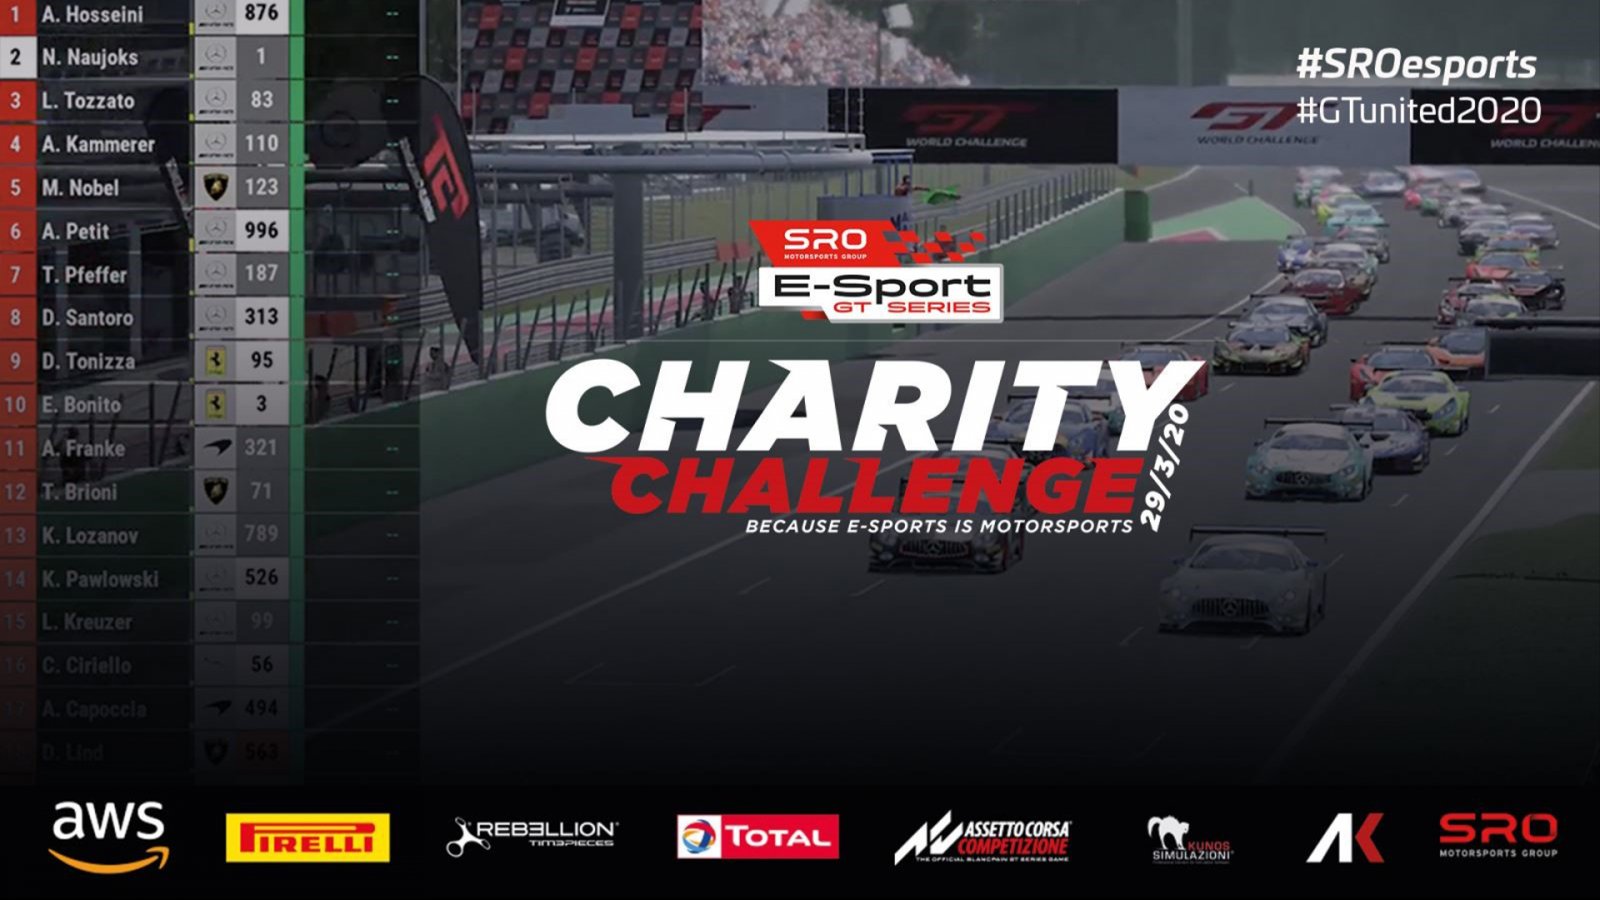 Kammerer claims victory in SRO E-Sport GT Series Charity Challenge race at Monza